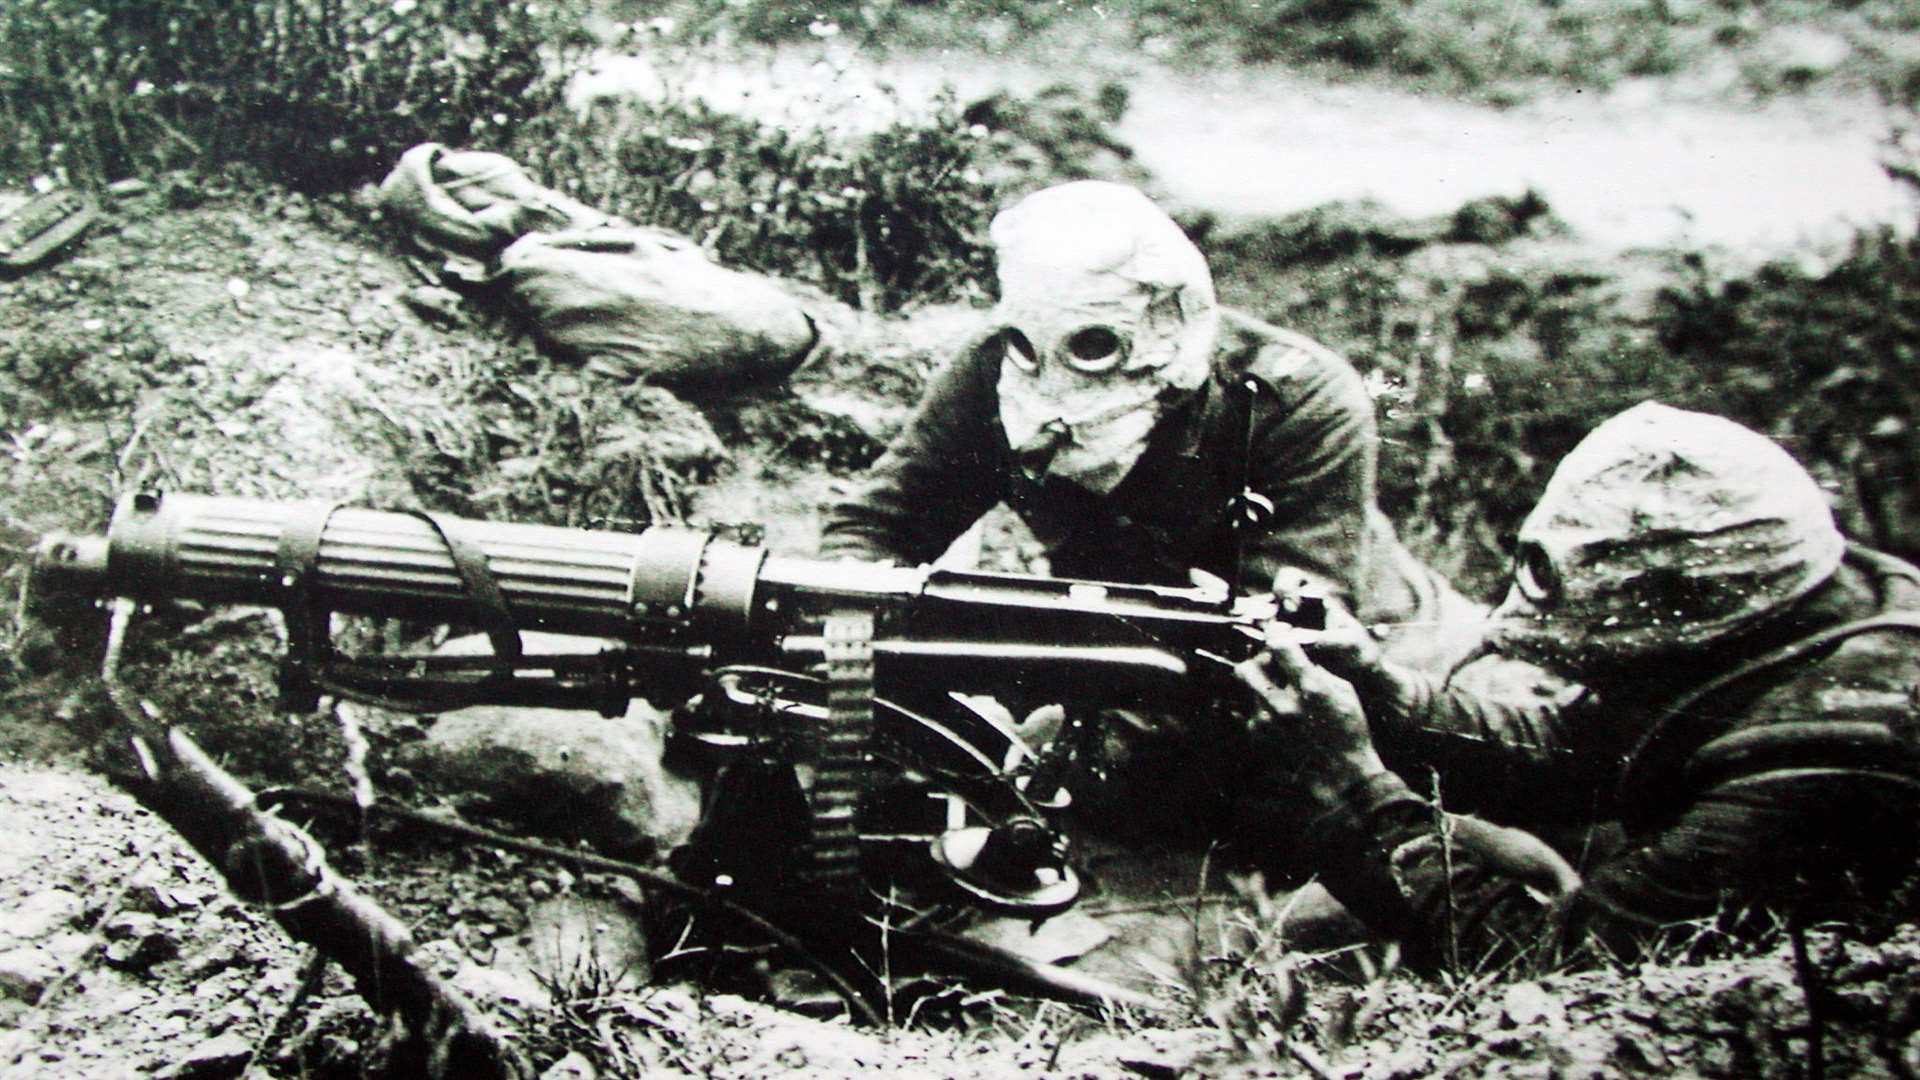 British machine gunners wearing gas masks in the Battle of the Somme.